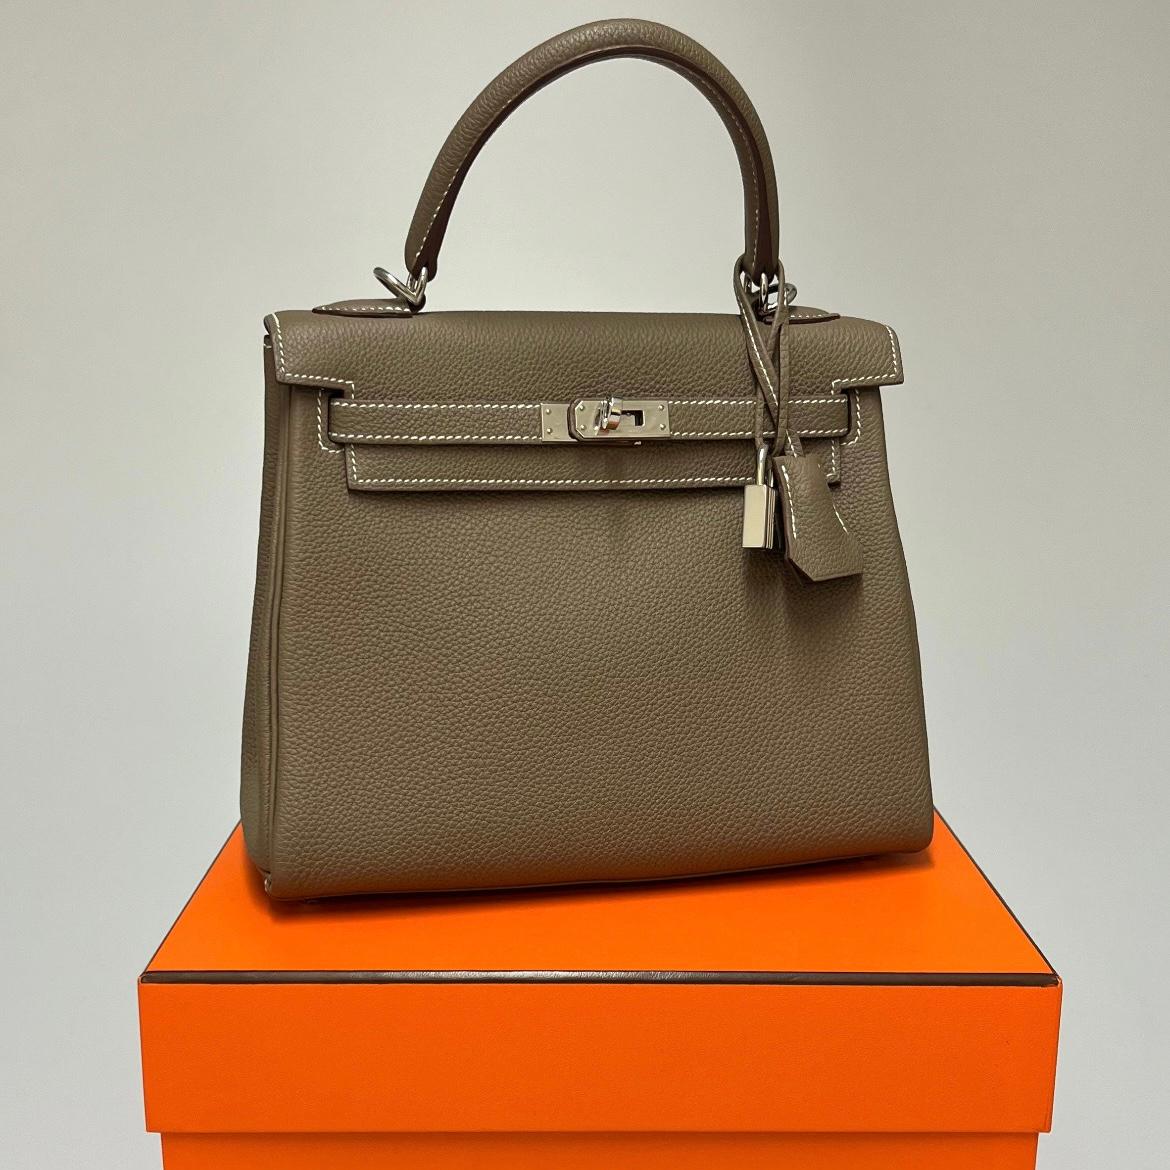 Beautiful and rare Kelly 25 in togo leather, delivered in its original Hermès dustbag and box.

Condition : very good. The bag was never worn, but the plastic was removed from the hardware.
Made in France
Collection: Kelly
Size : 25 cm
Material :